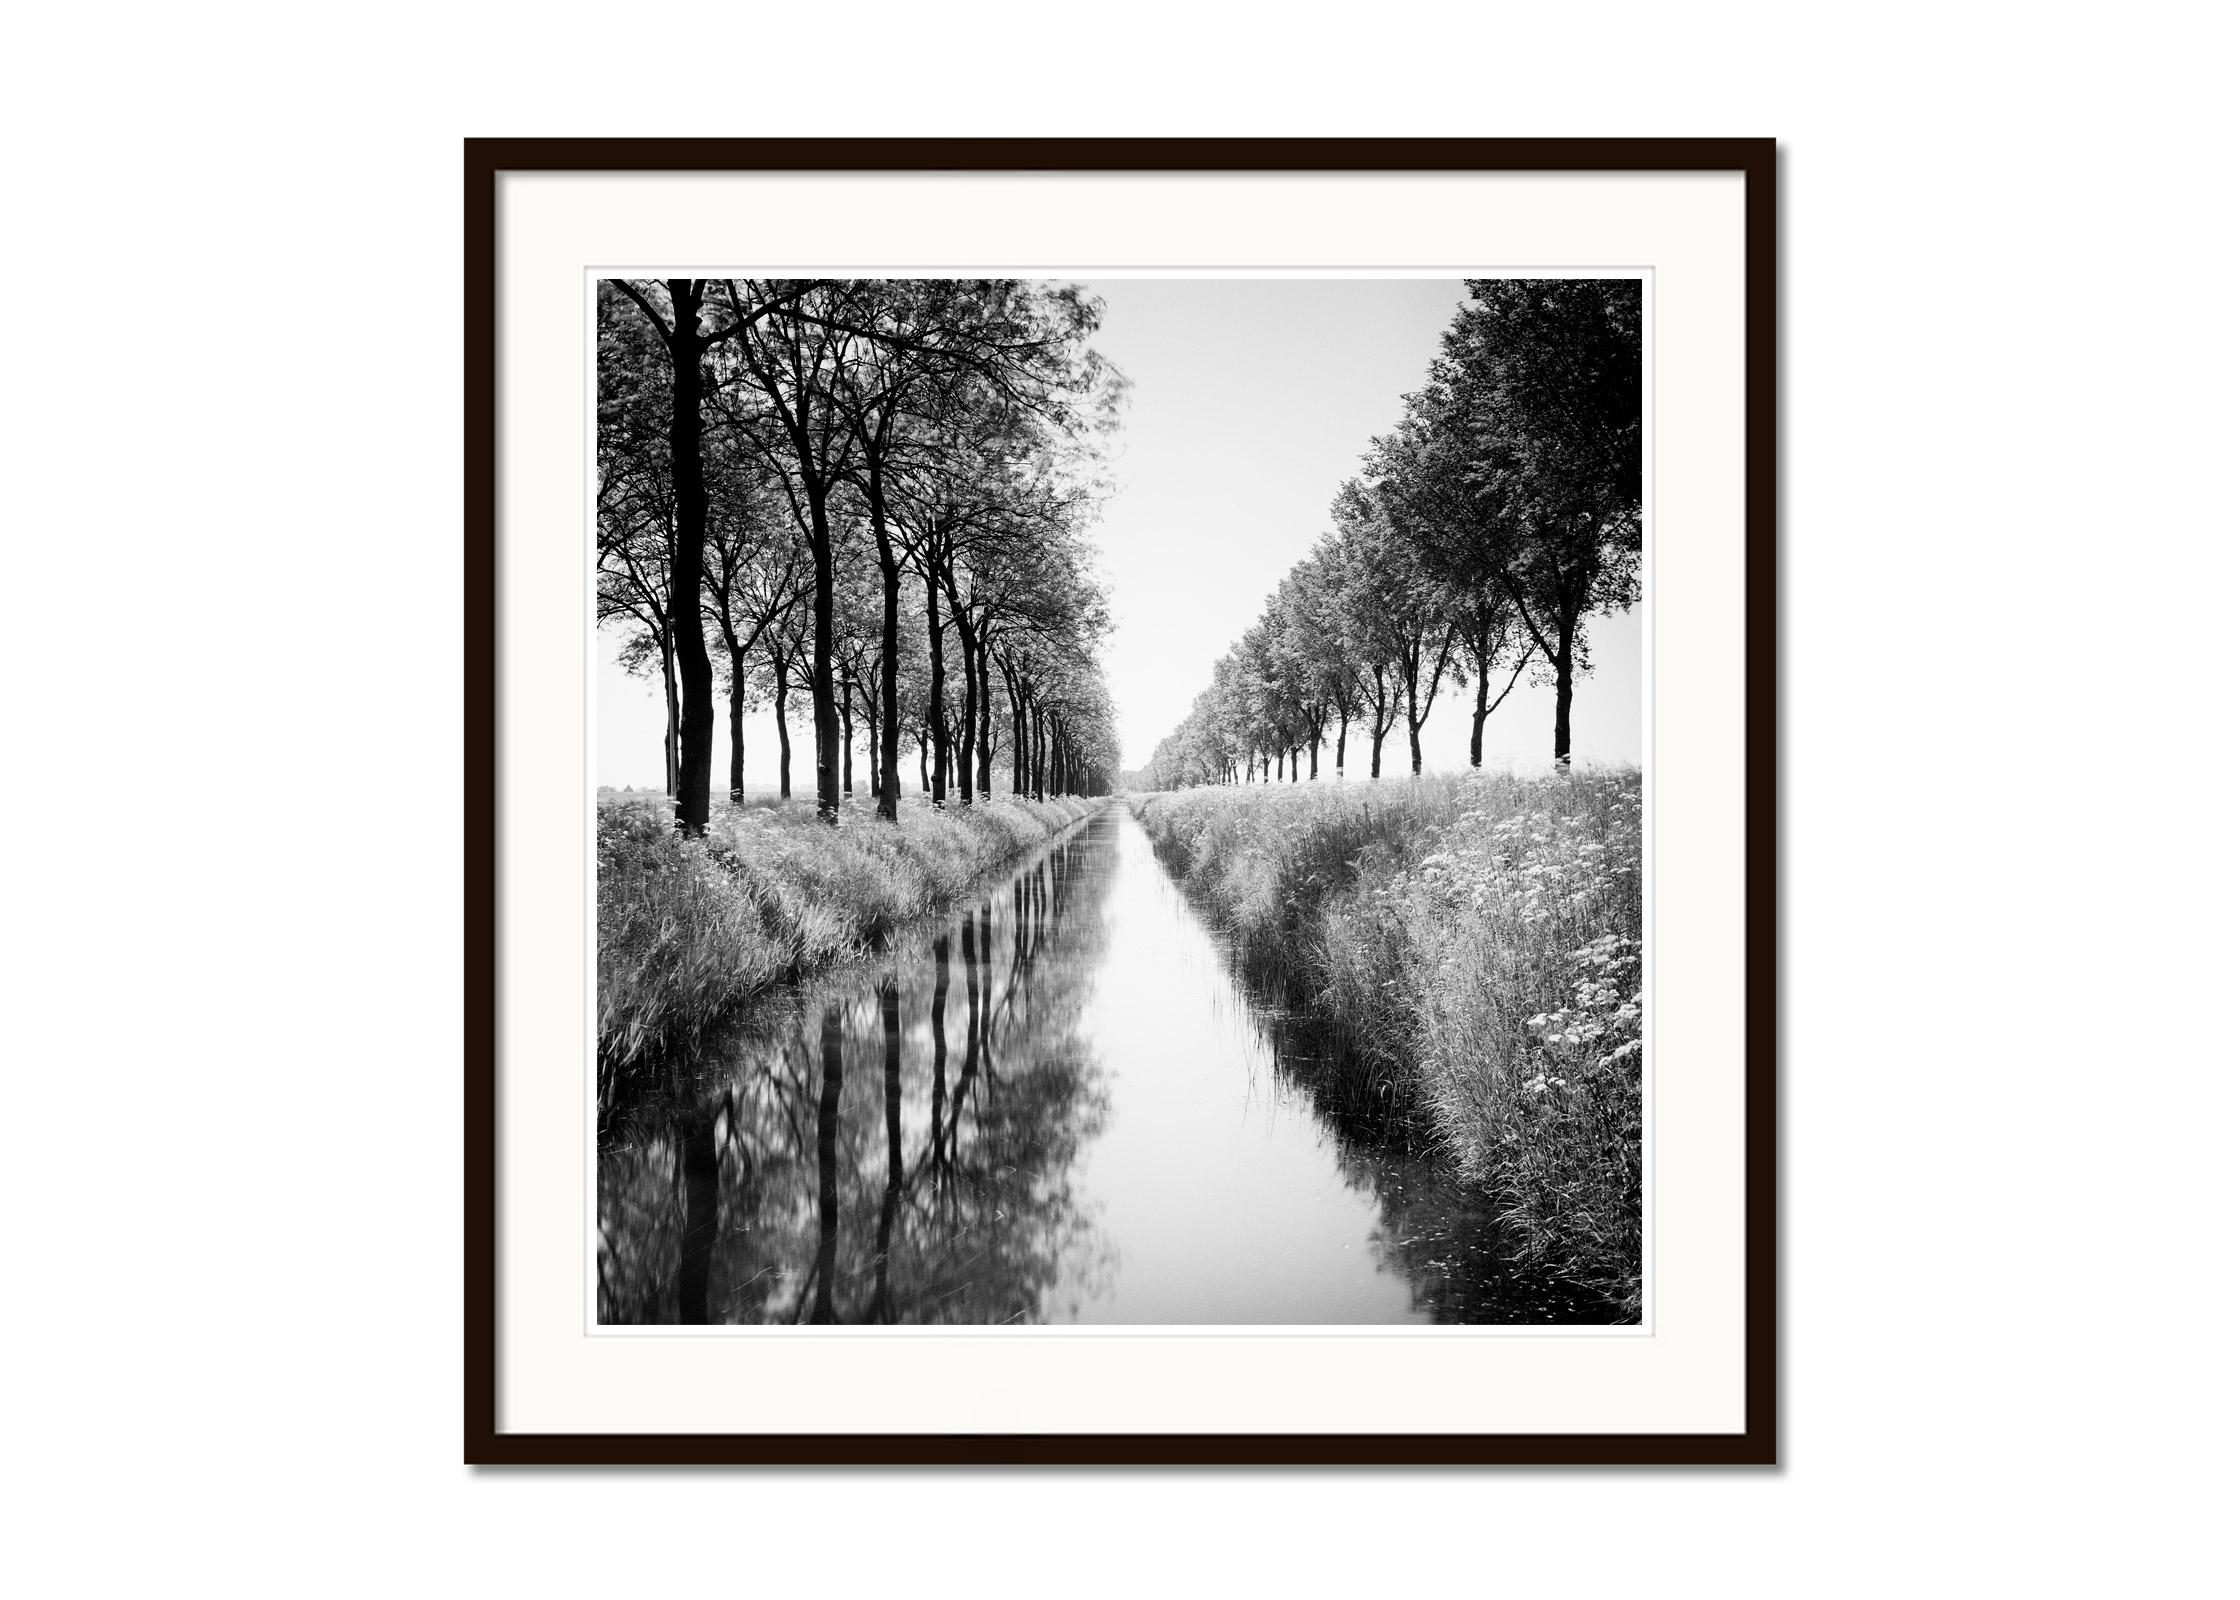 Gracht, tree avenue, water reflection, black and white long exposure photography - Black Black and White Photograph by Gerald Berghammer